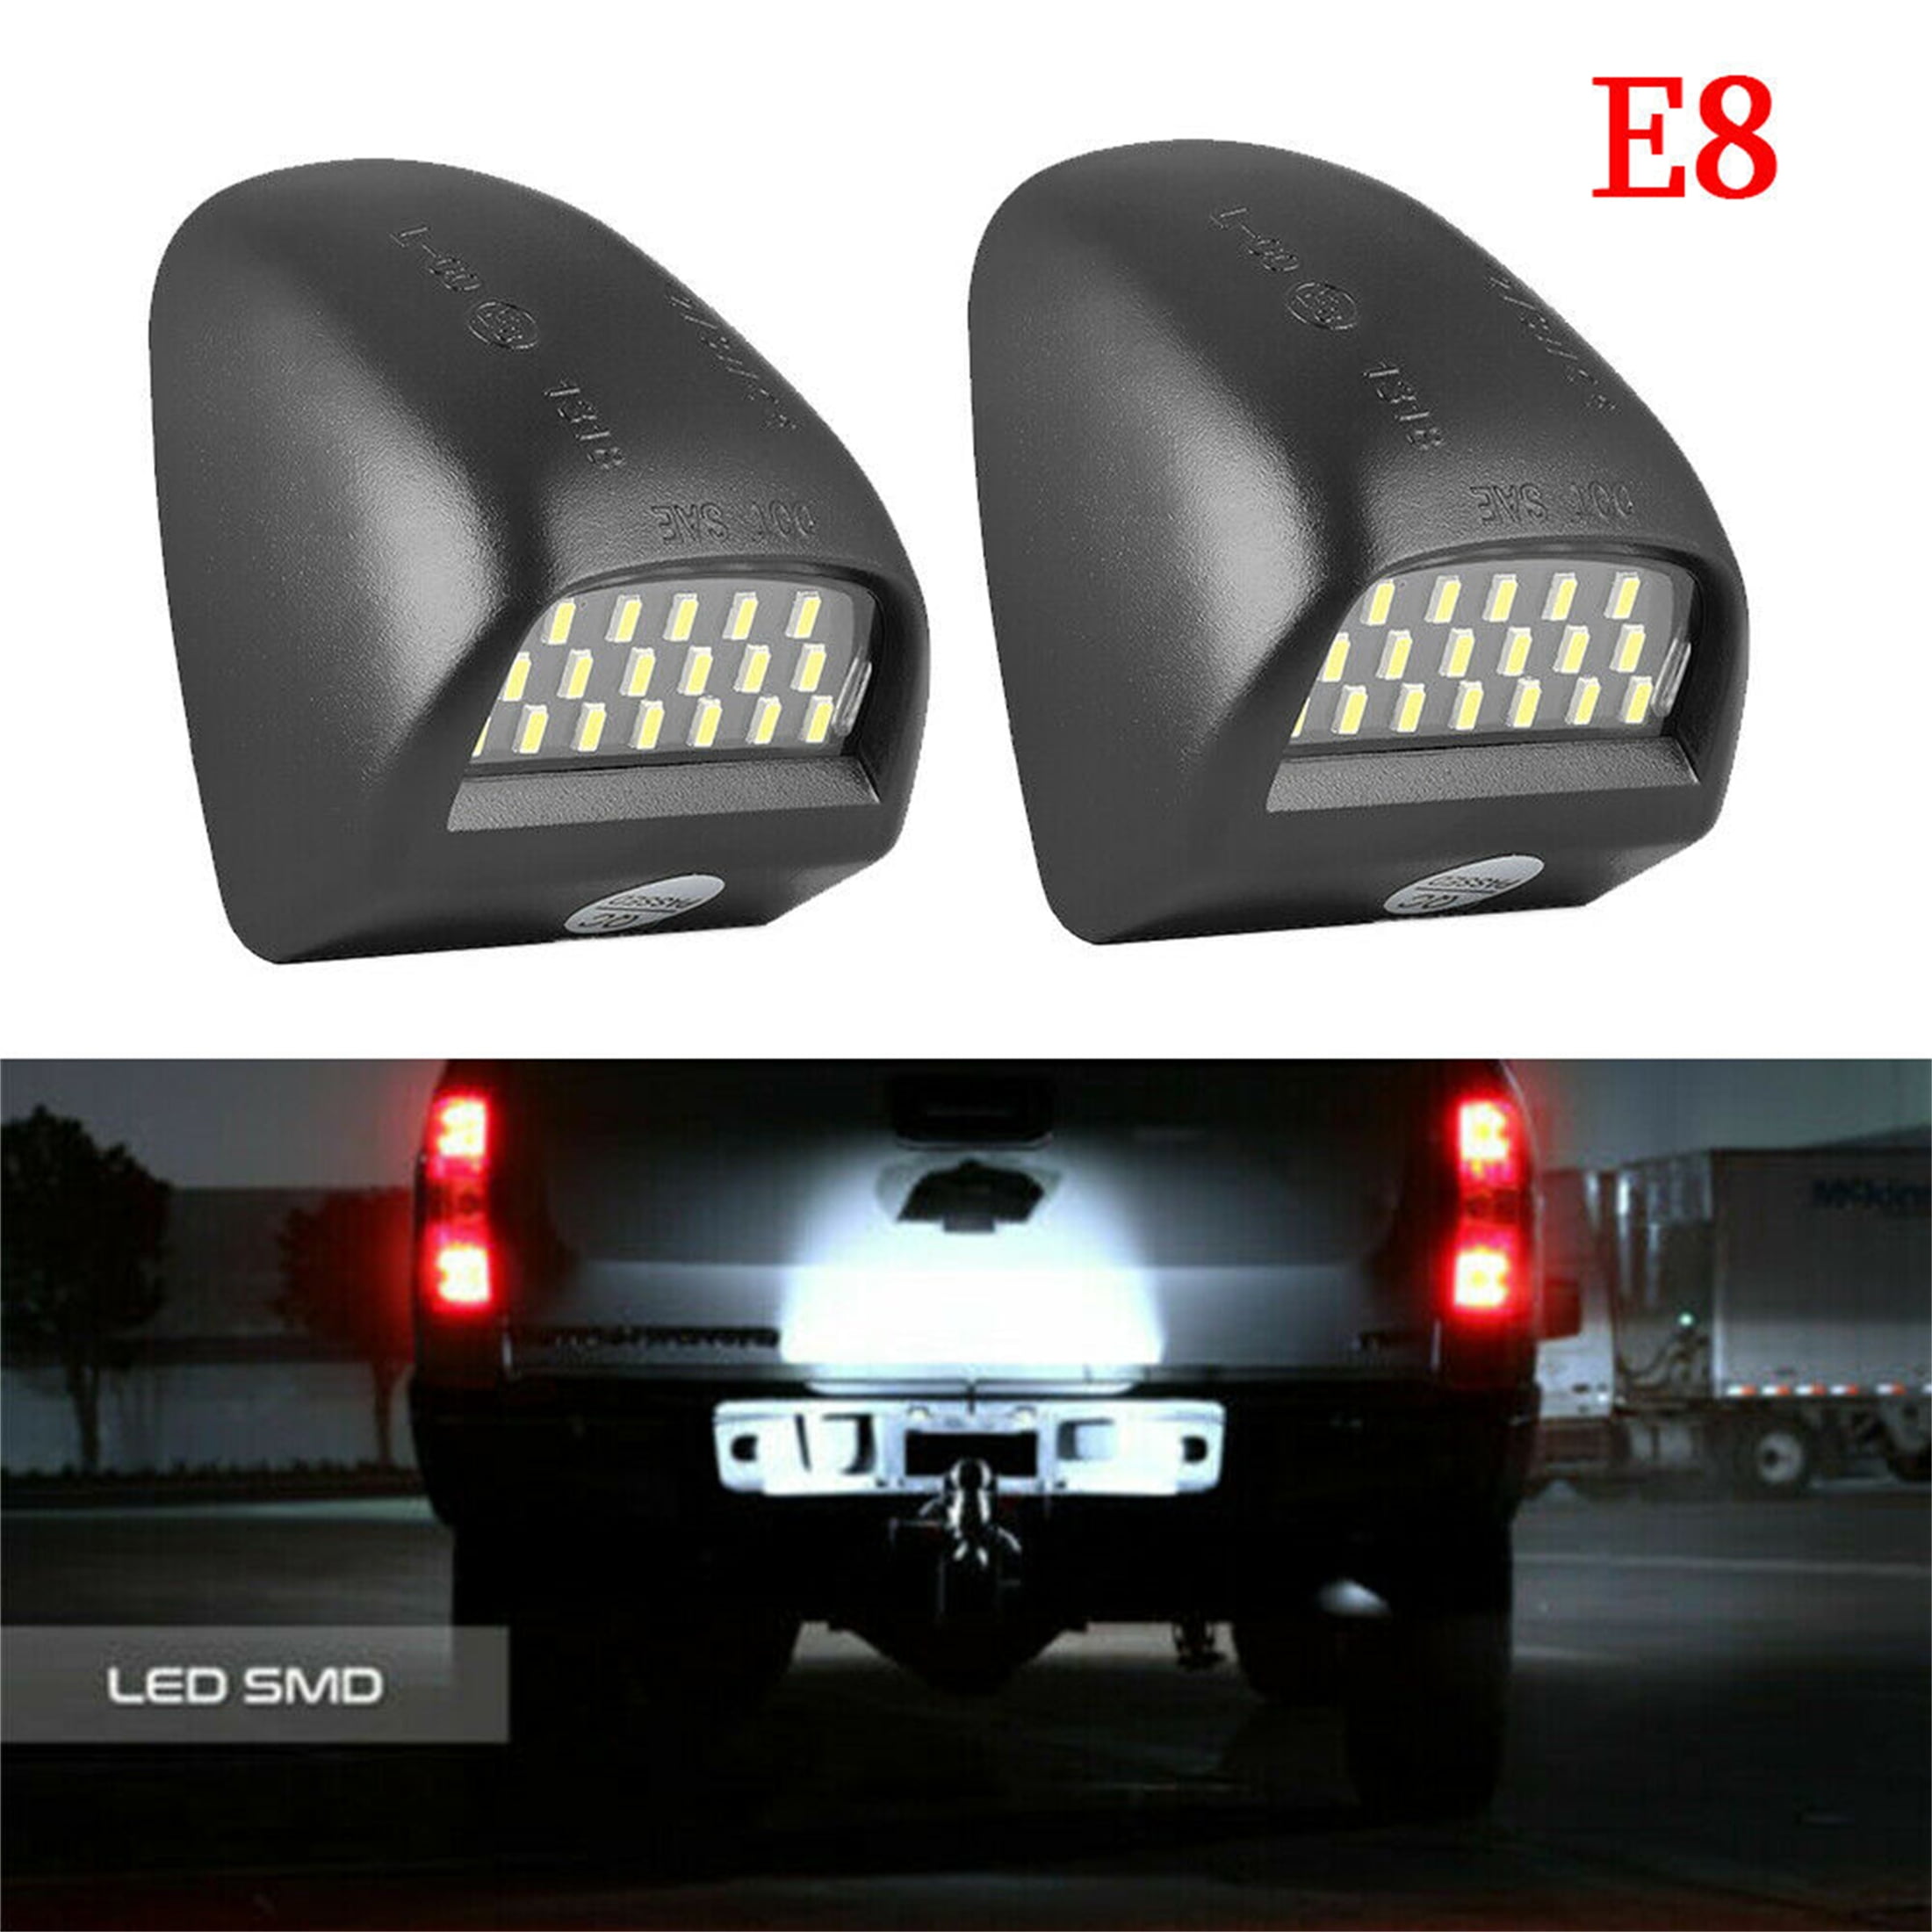 For 1999-2013 Chevy Silverado Avalanche Bright SMD LED License Plate Light Lamp